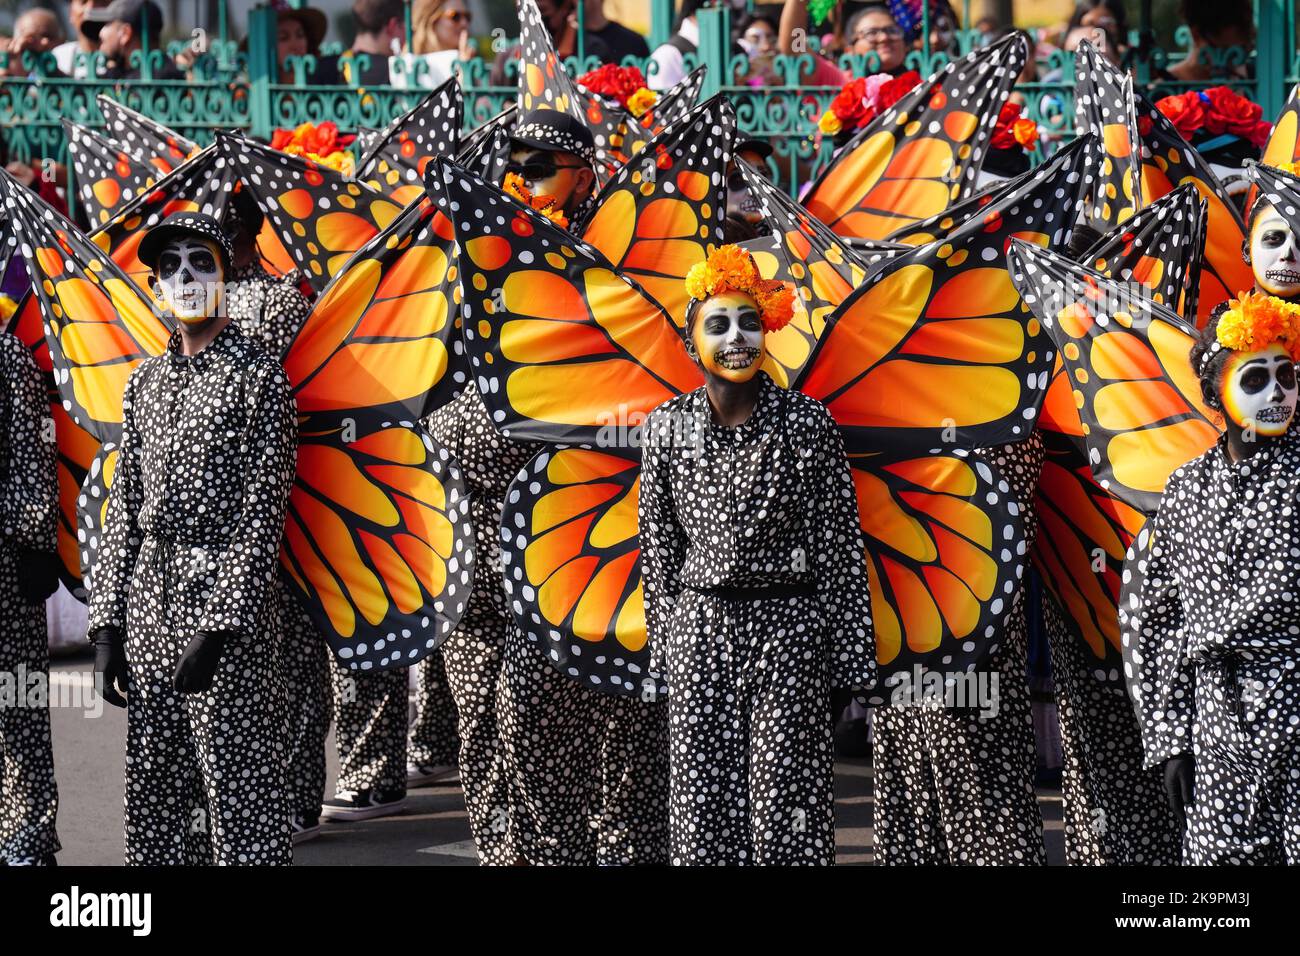 Mexico City, Mexico. 29th Oct, 2022. Monarch butterfly costumed performers wait in the sun for the start of the Grand Parade of the Dead to celebrate Dia de los Muertos holiday on Paseo de la Reforma, October 29, 2022 in Mexico City, Mexico. Credit: Richard Ellis/Richard Ellis/Alamy Live News Stock Photo